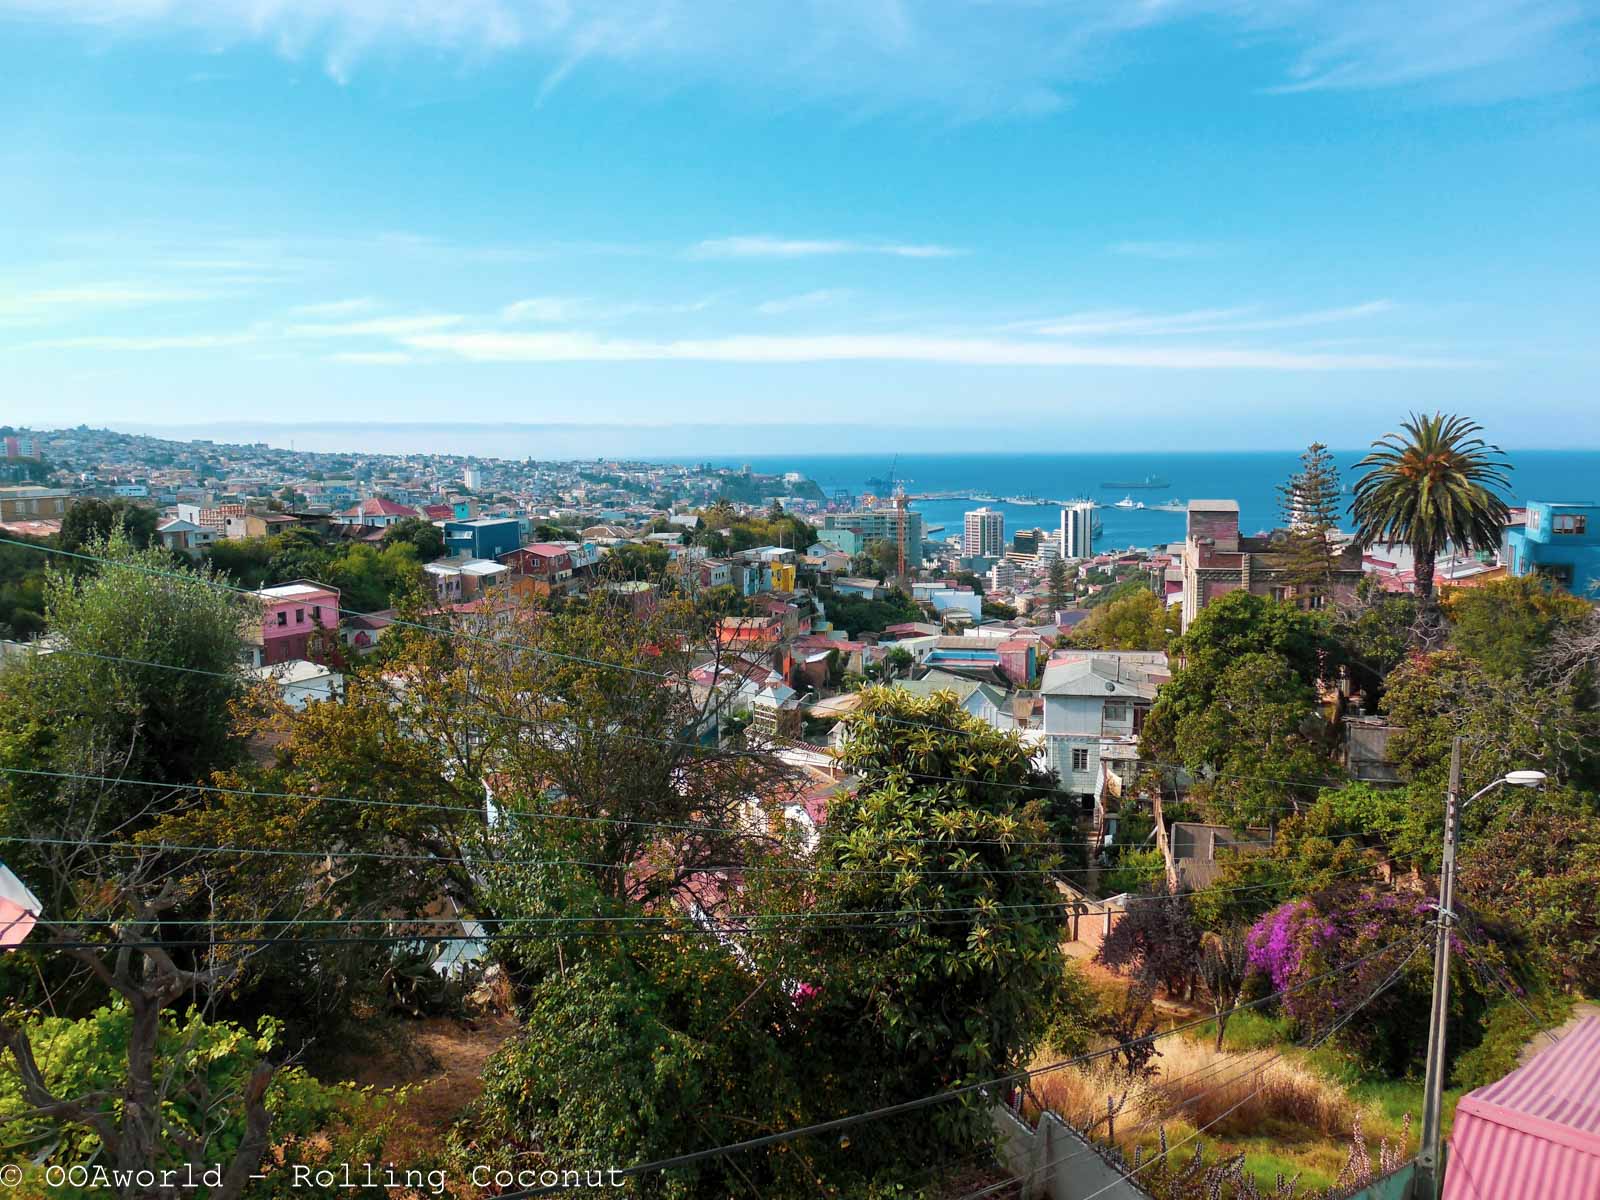 Valparaiso from Pablo Neruda's home, Chile - OOAworld Rolling Coconut